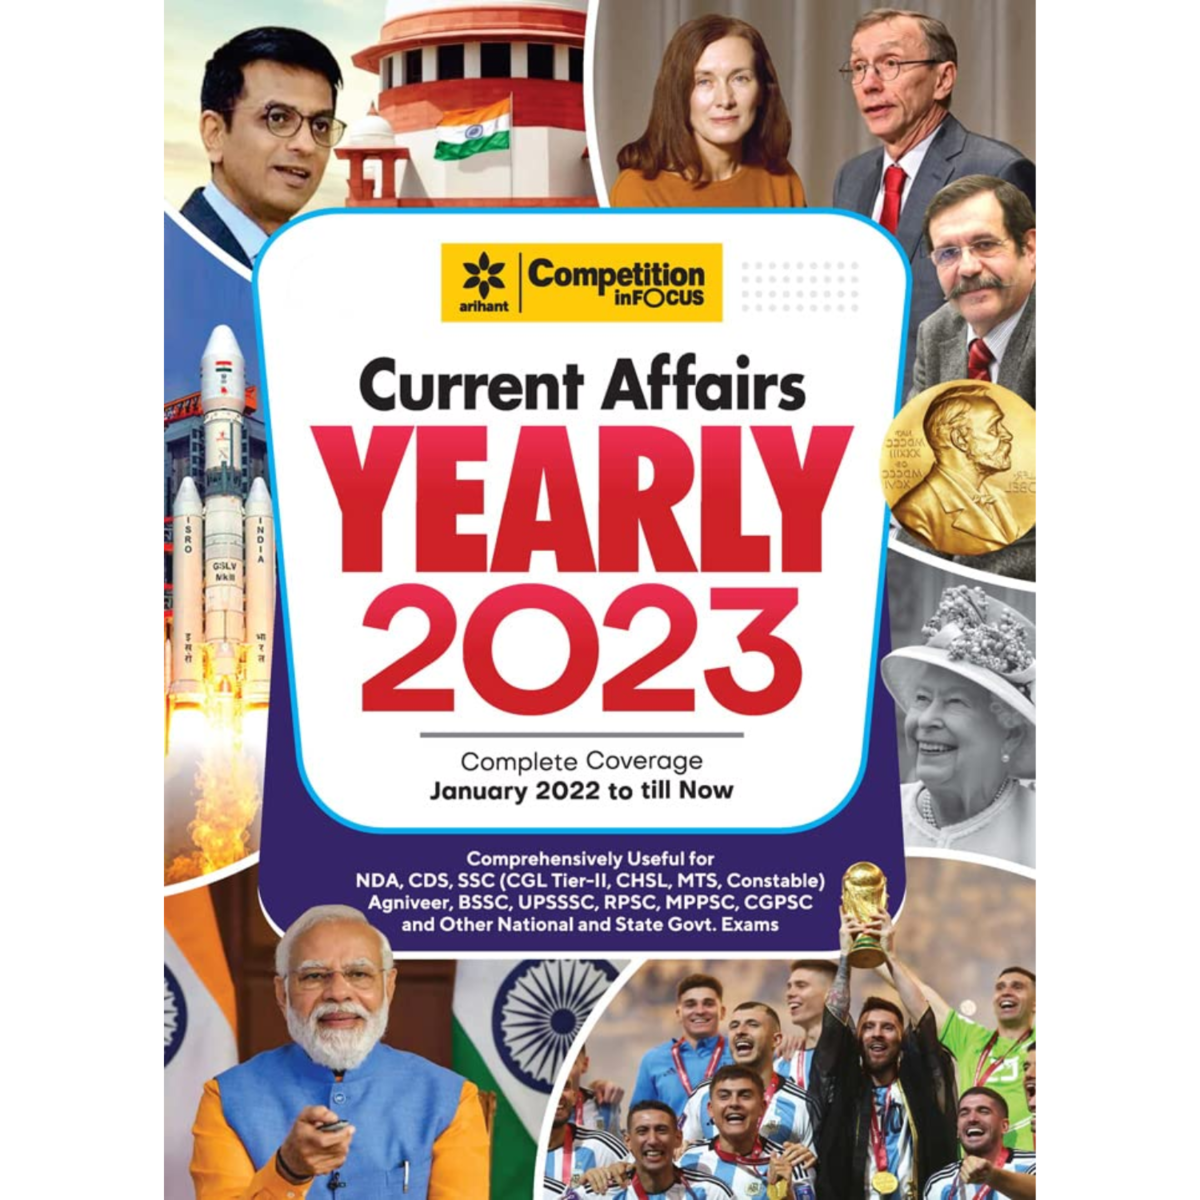 Speedy Current Affairs Yearly 2022: Buy Speedy Current Affairs